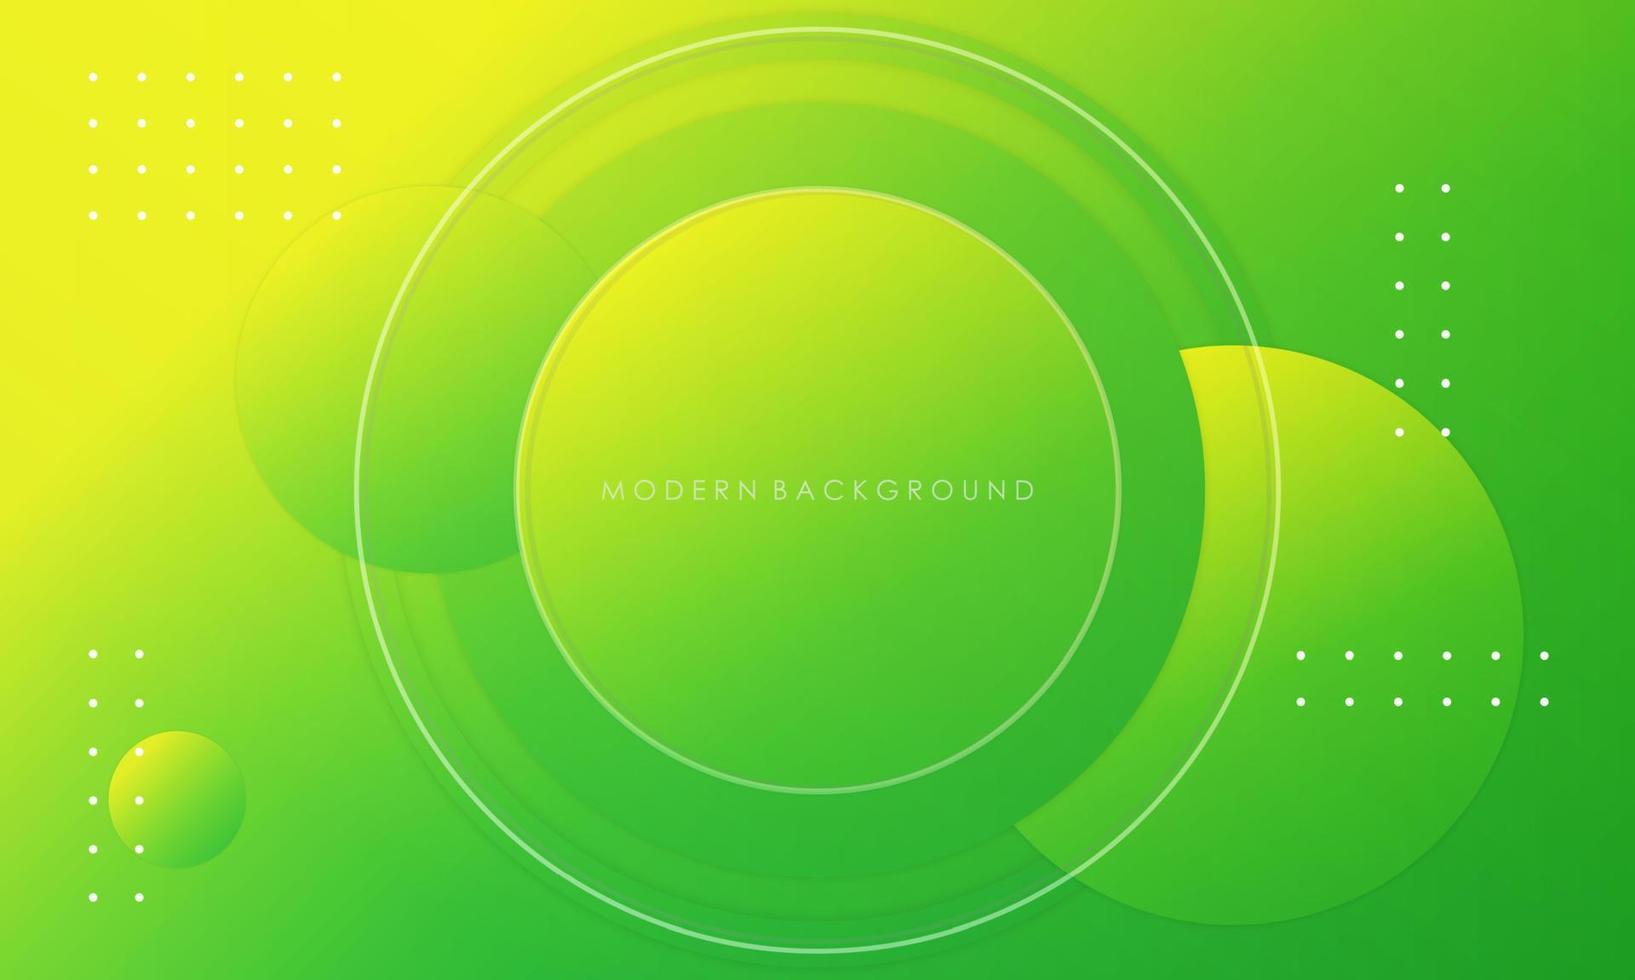 Modern gradients green and yellow color background vector